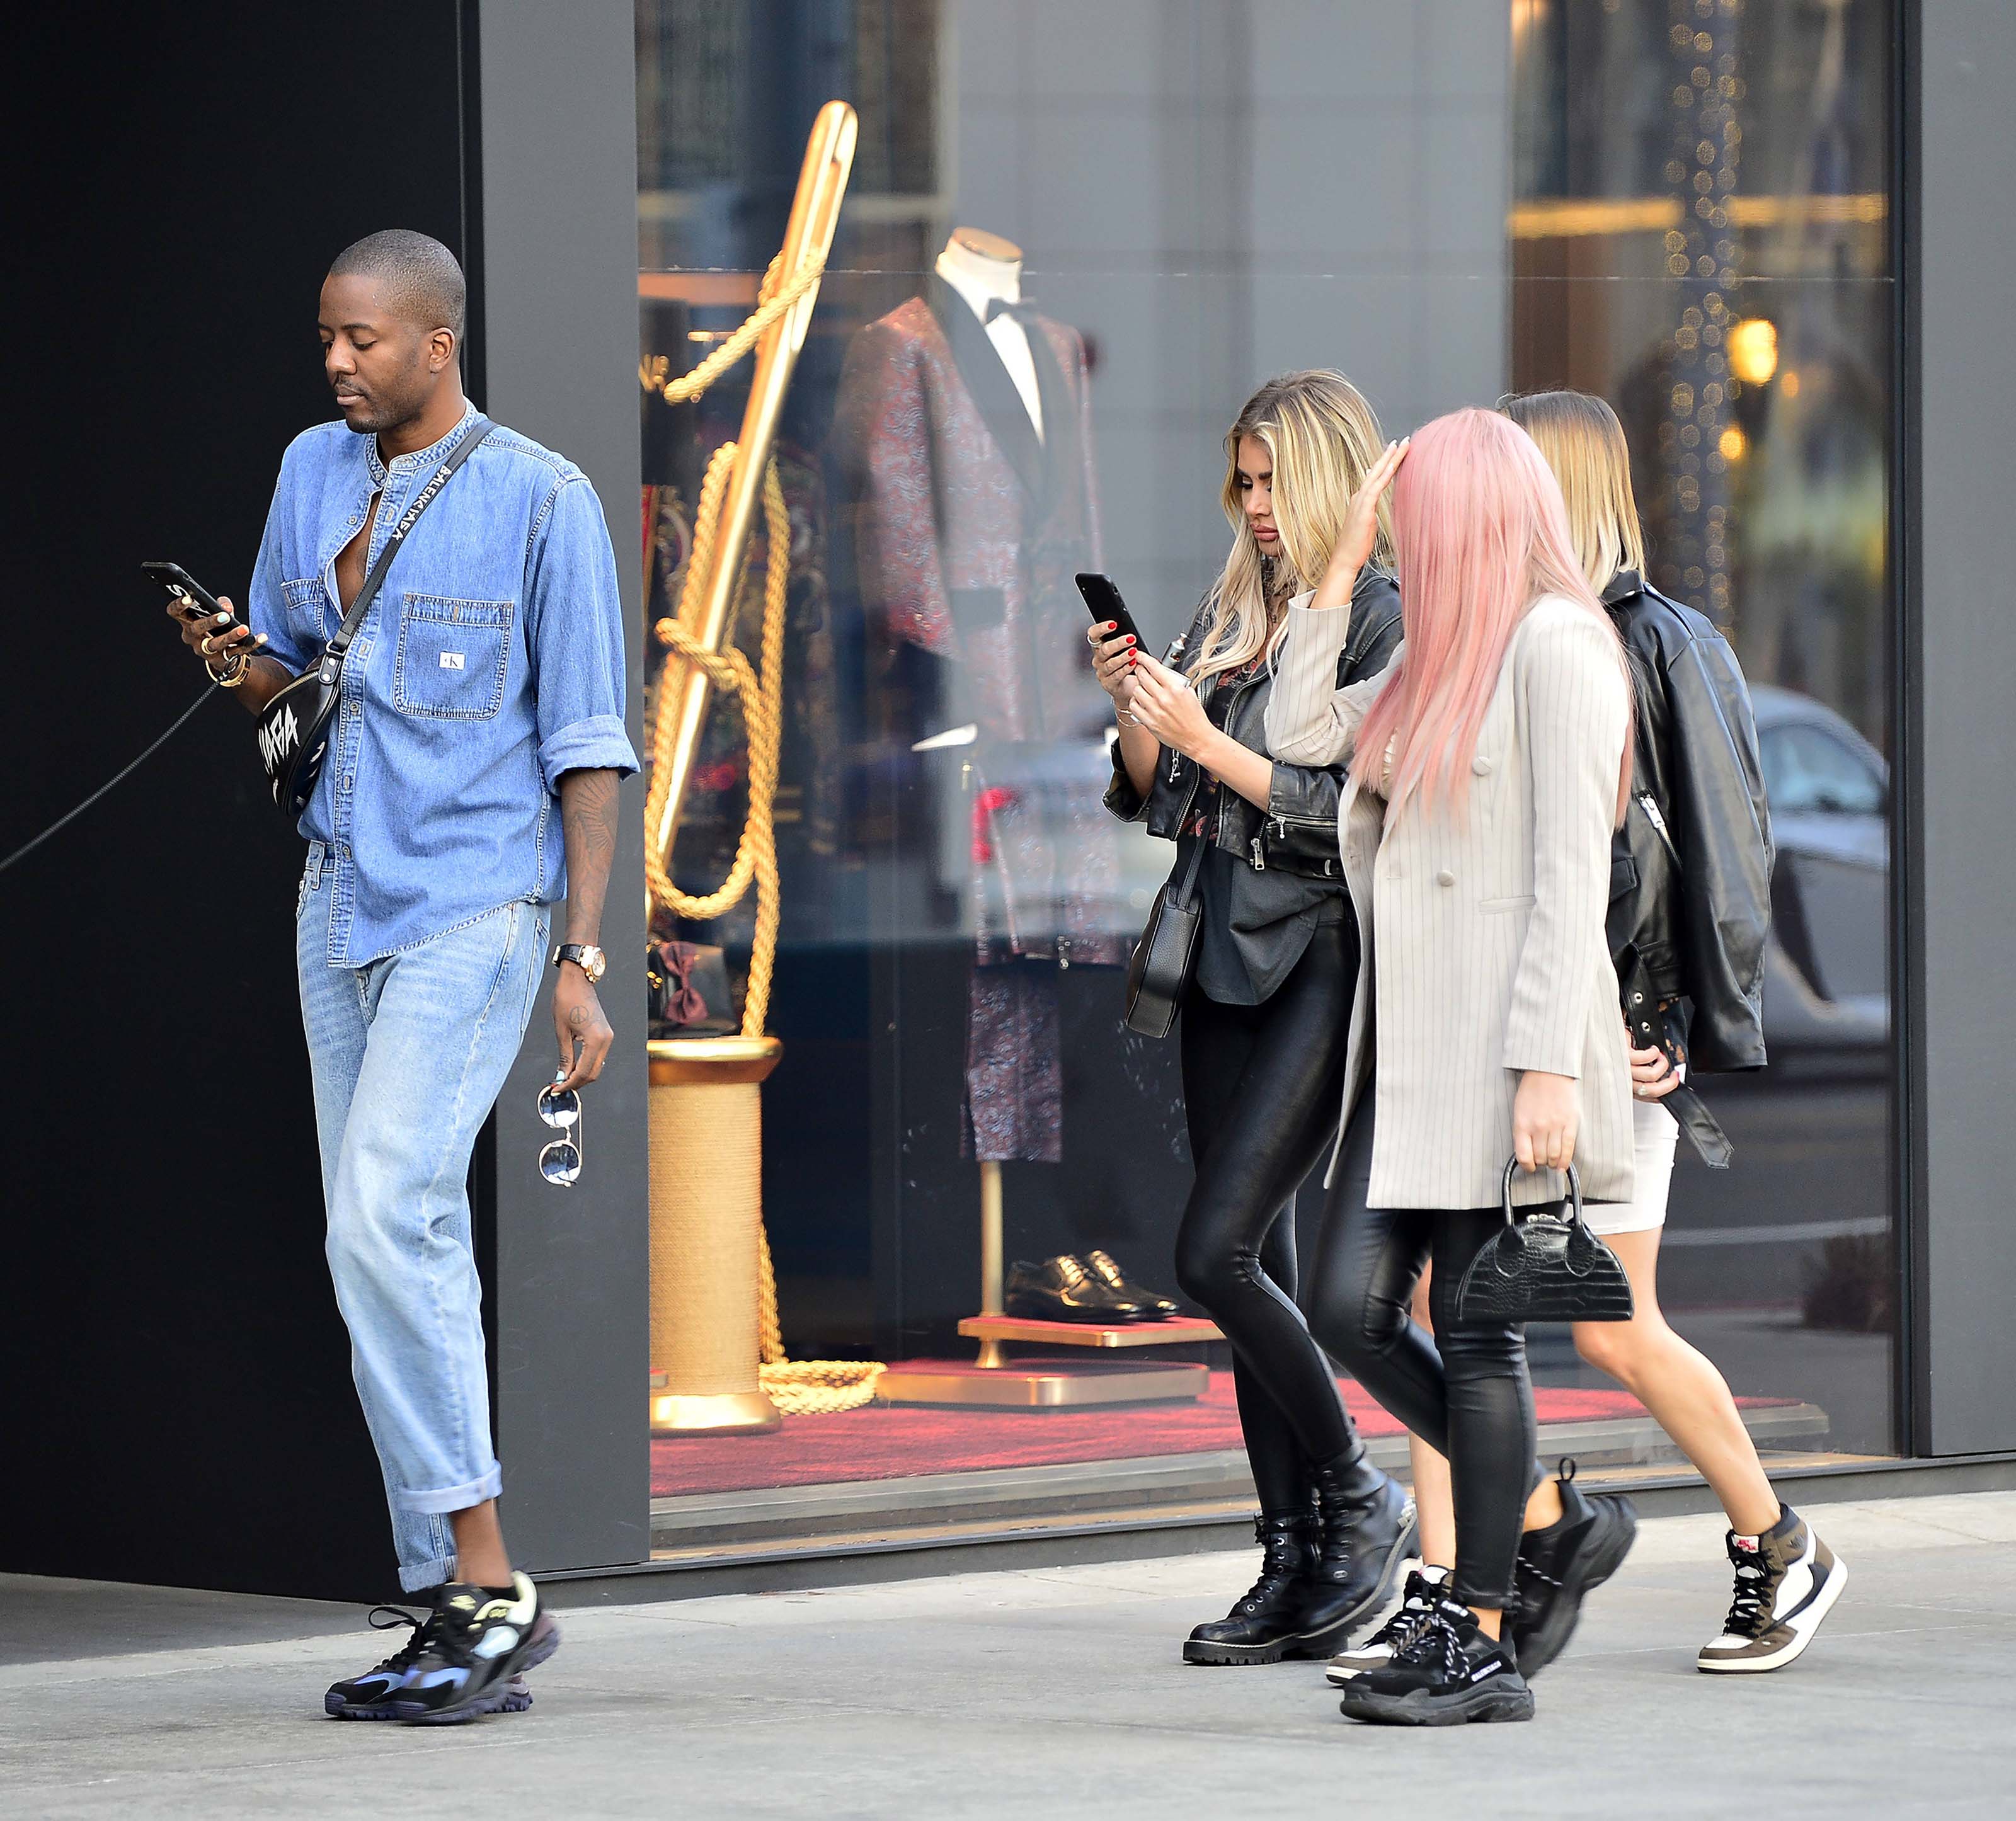 Chloe Sims shopping on Rodeo Drive